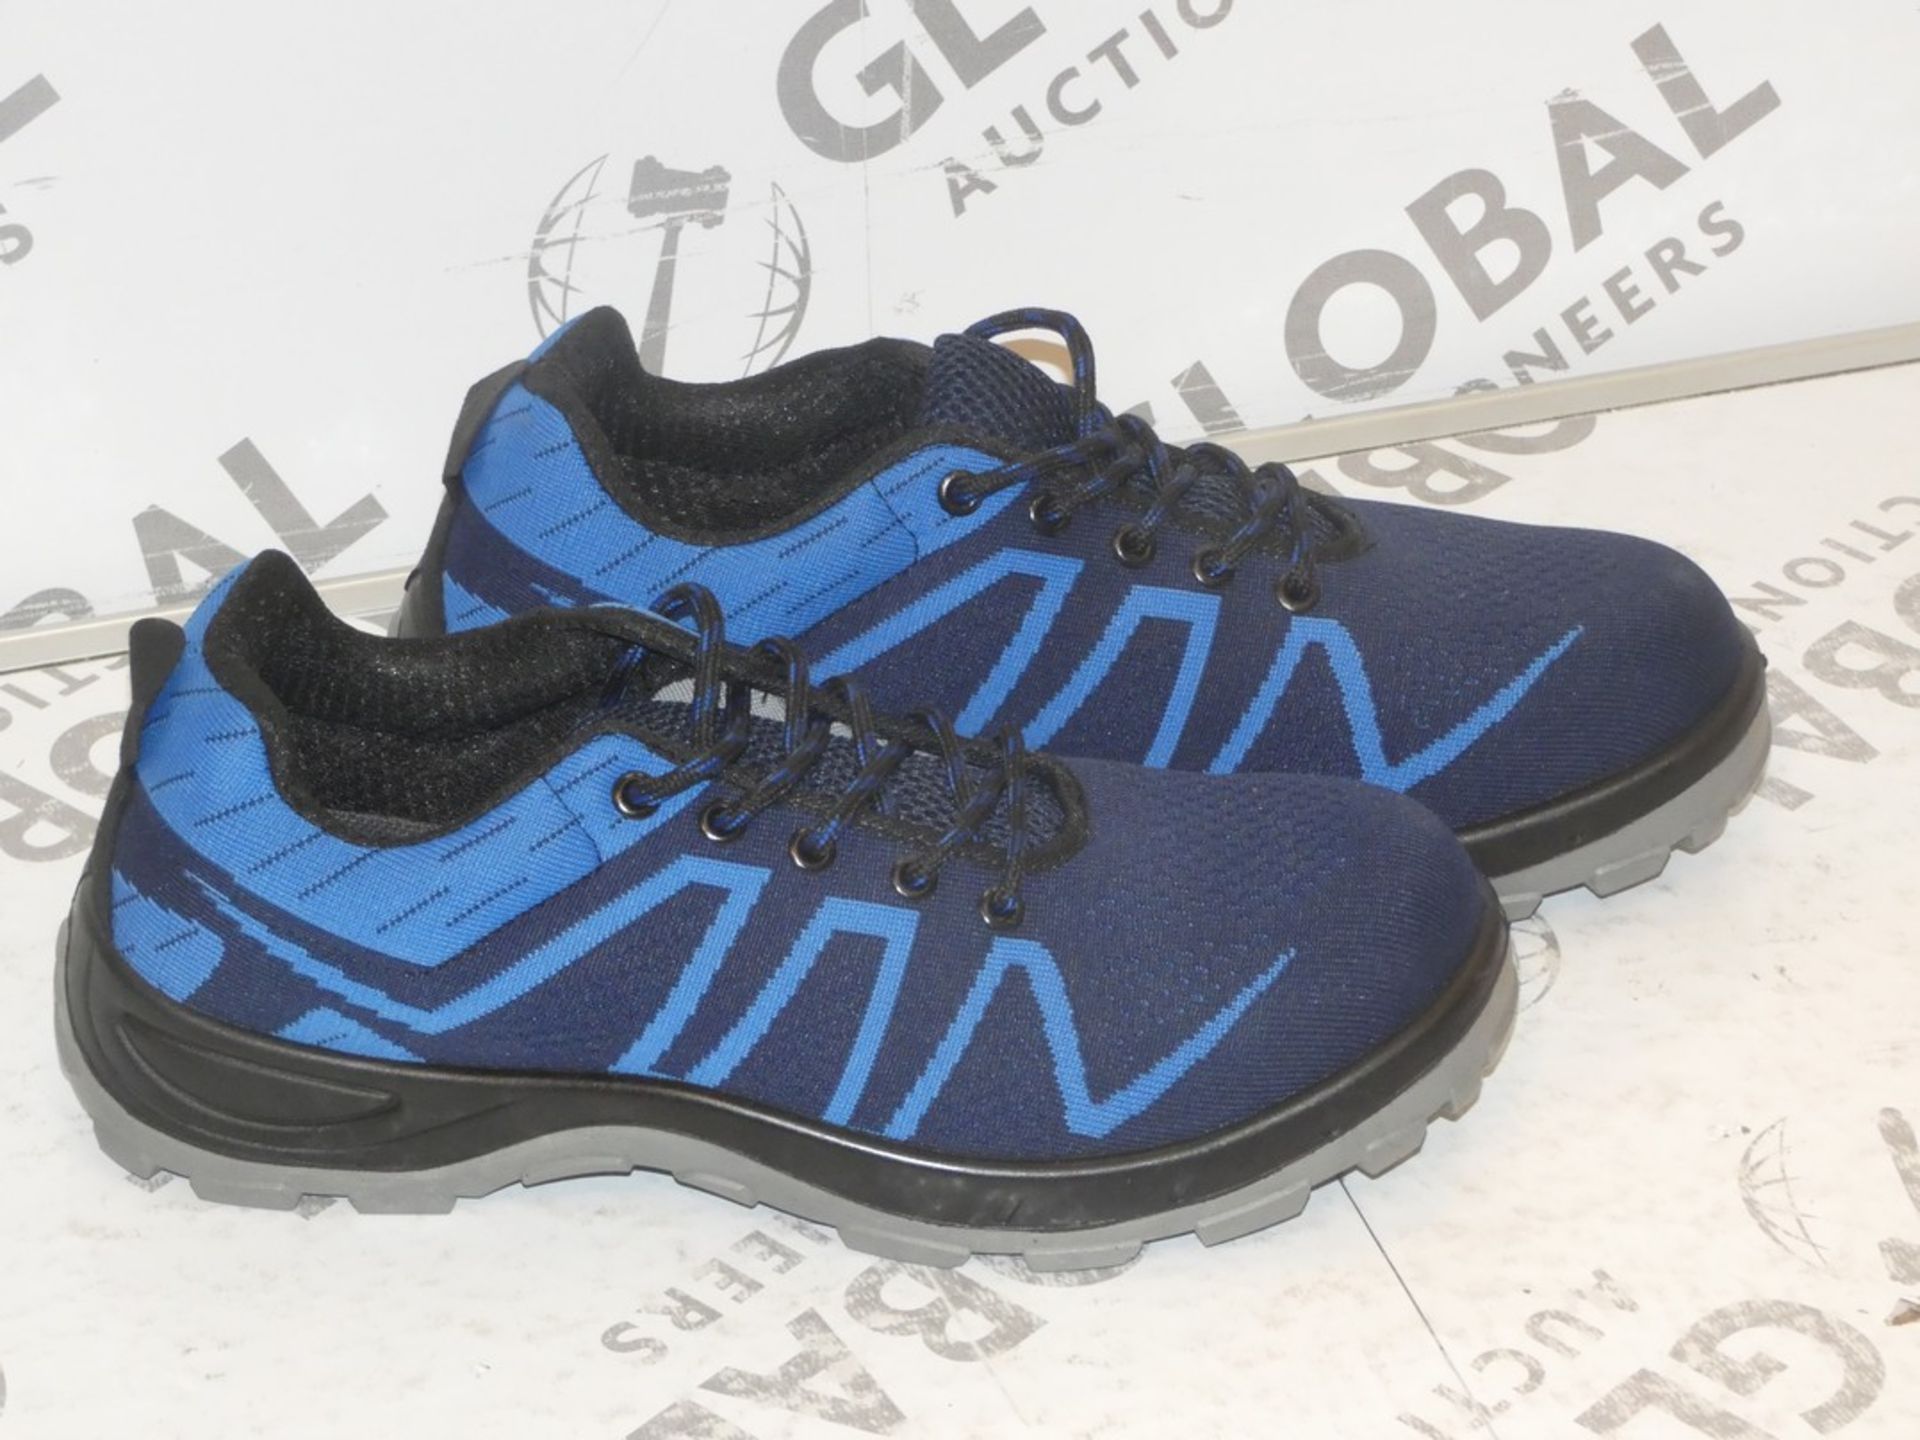 Lot to Contain 2 Brand New Pairs of Easy Safe Steel Toe Cap Safety Trainers in Sizes EU40 and EU44